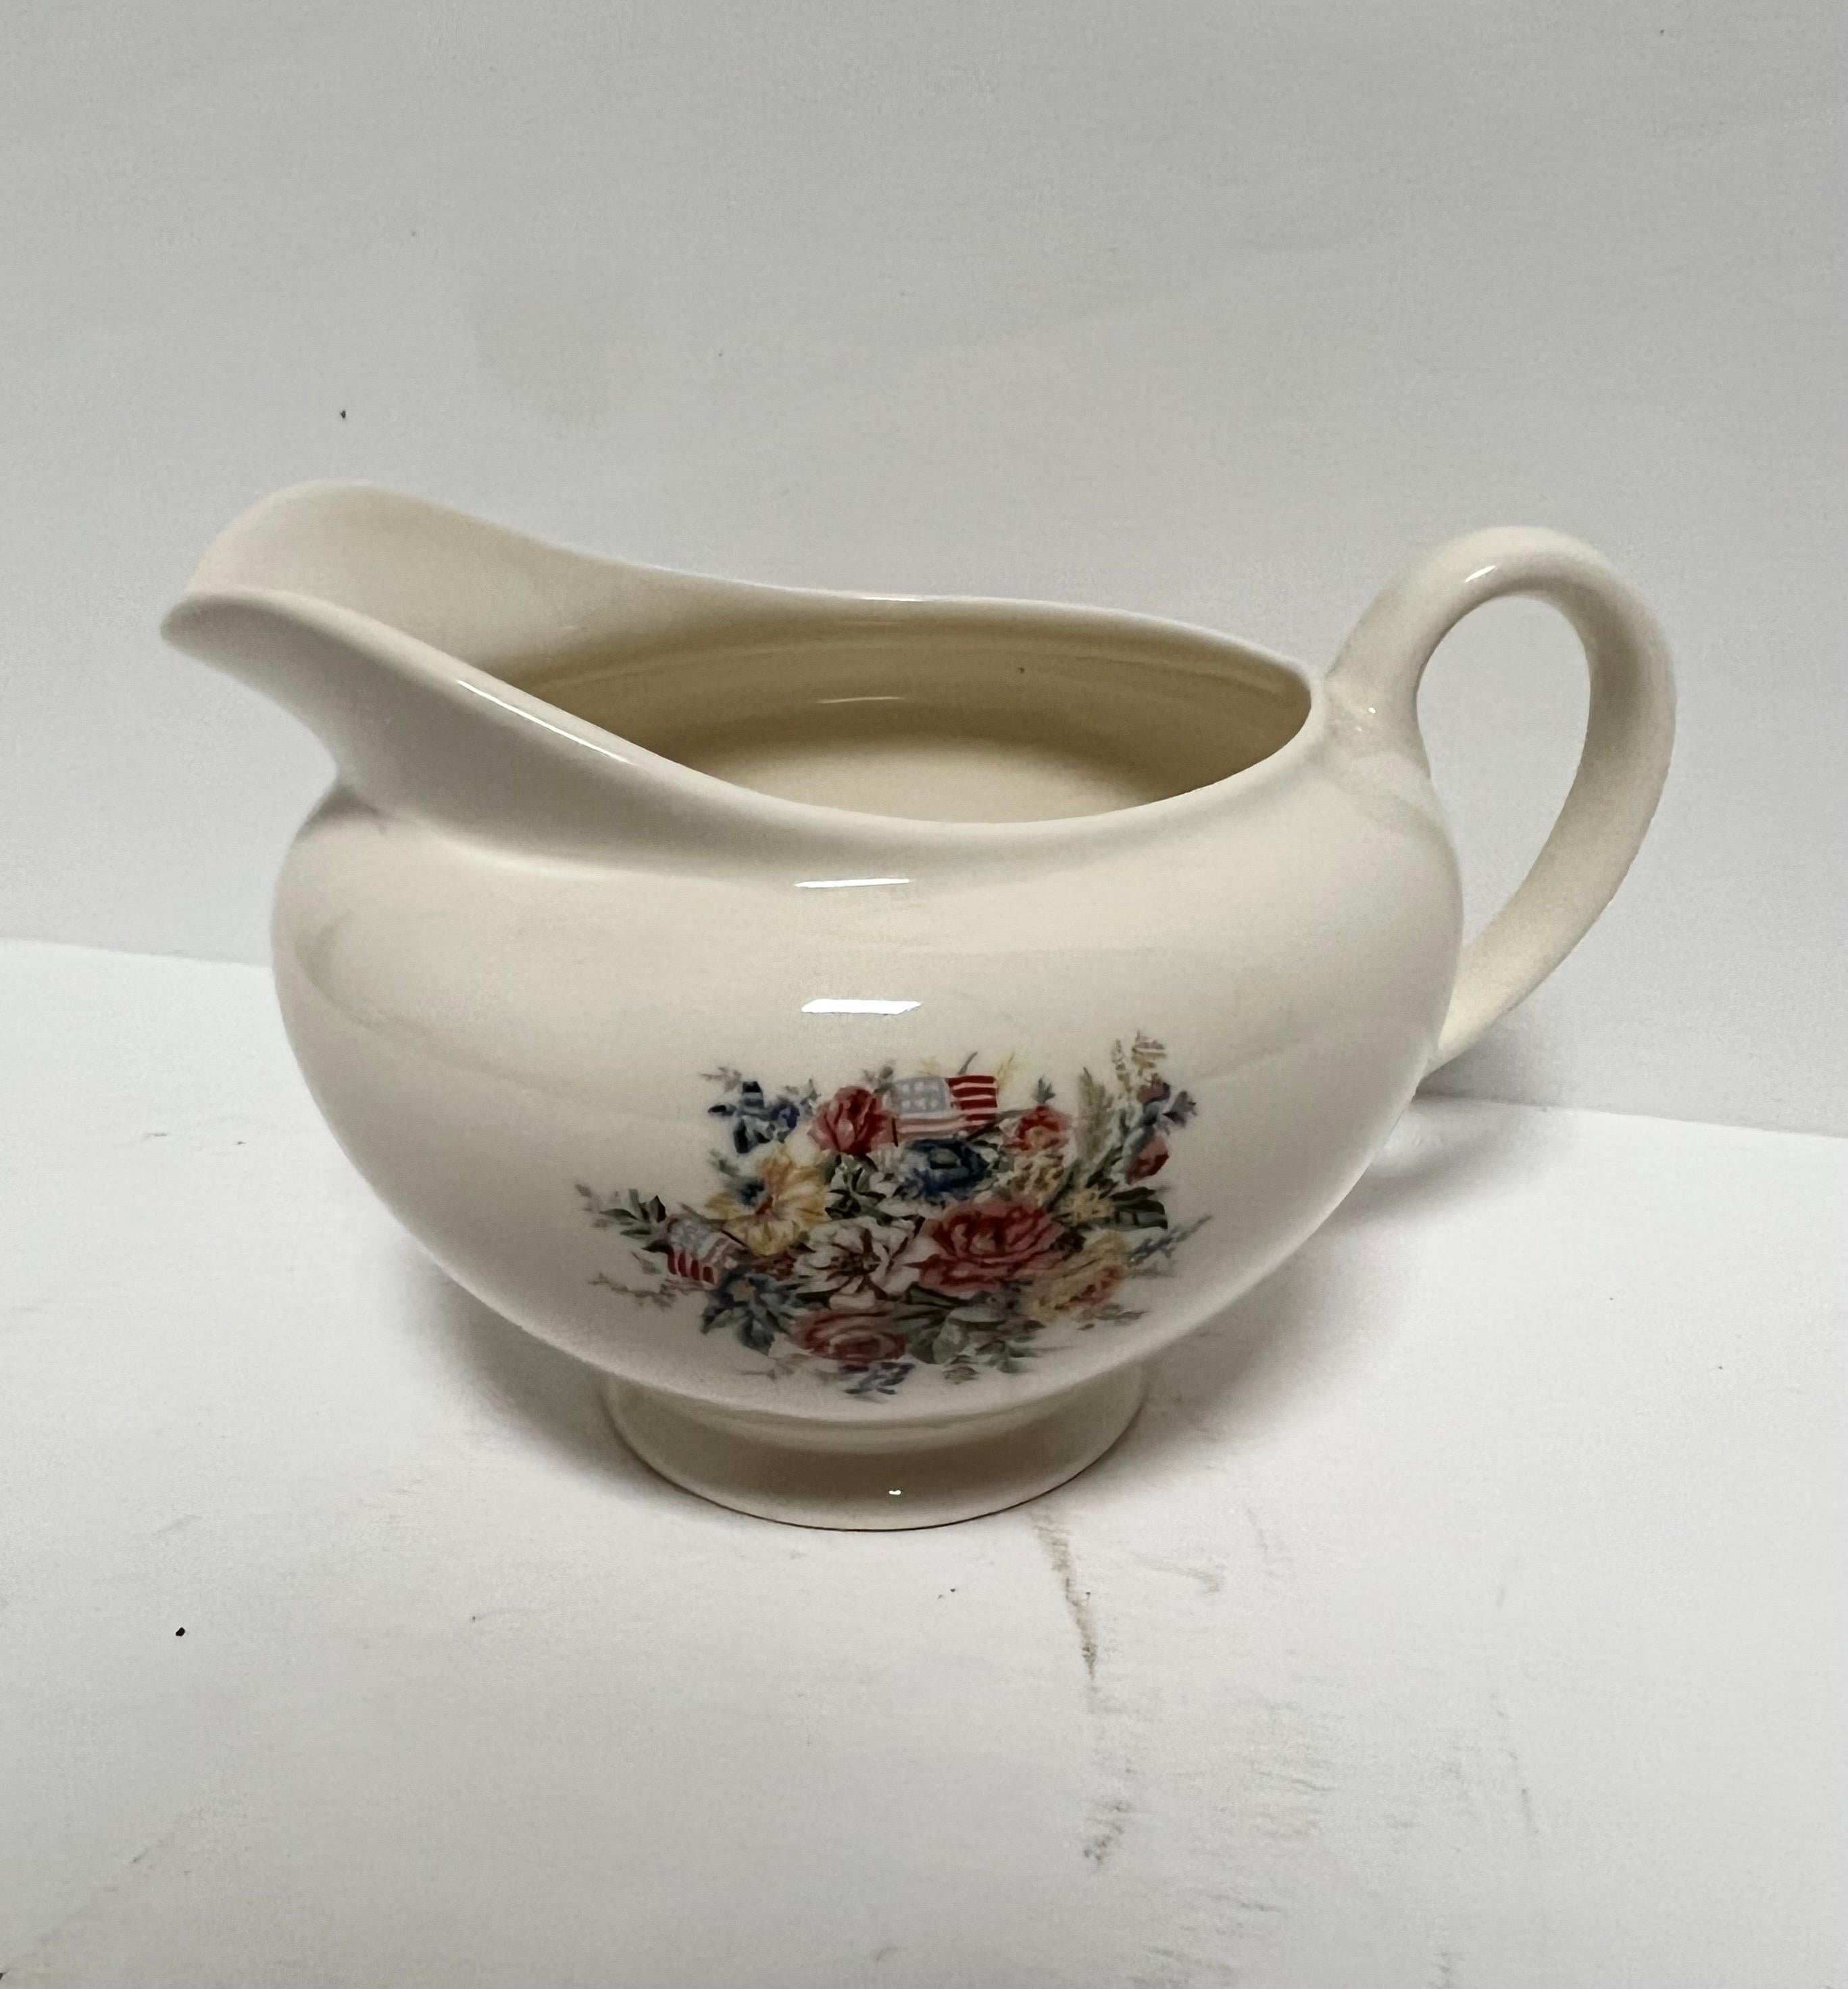 Creamer by Wedgwood for Ralph Lauren Home in the
Dylans Grove pattern.

Made in England. Discontinued; actual production period: 1993 - 1996.

Signed.

Design features Floral Center and American Flags complemented by Blue Band.

Very good/pre-owned